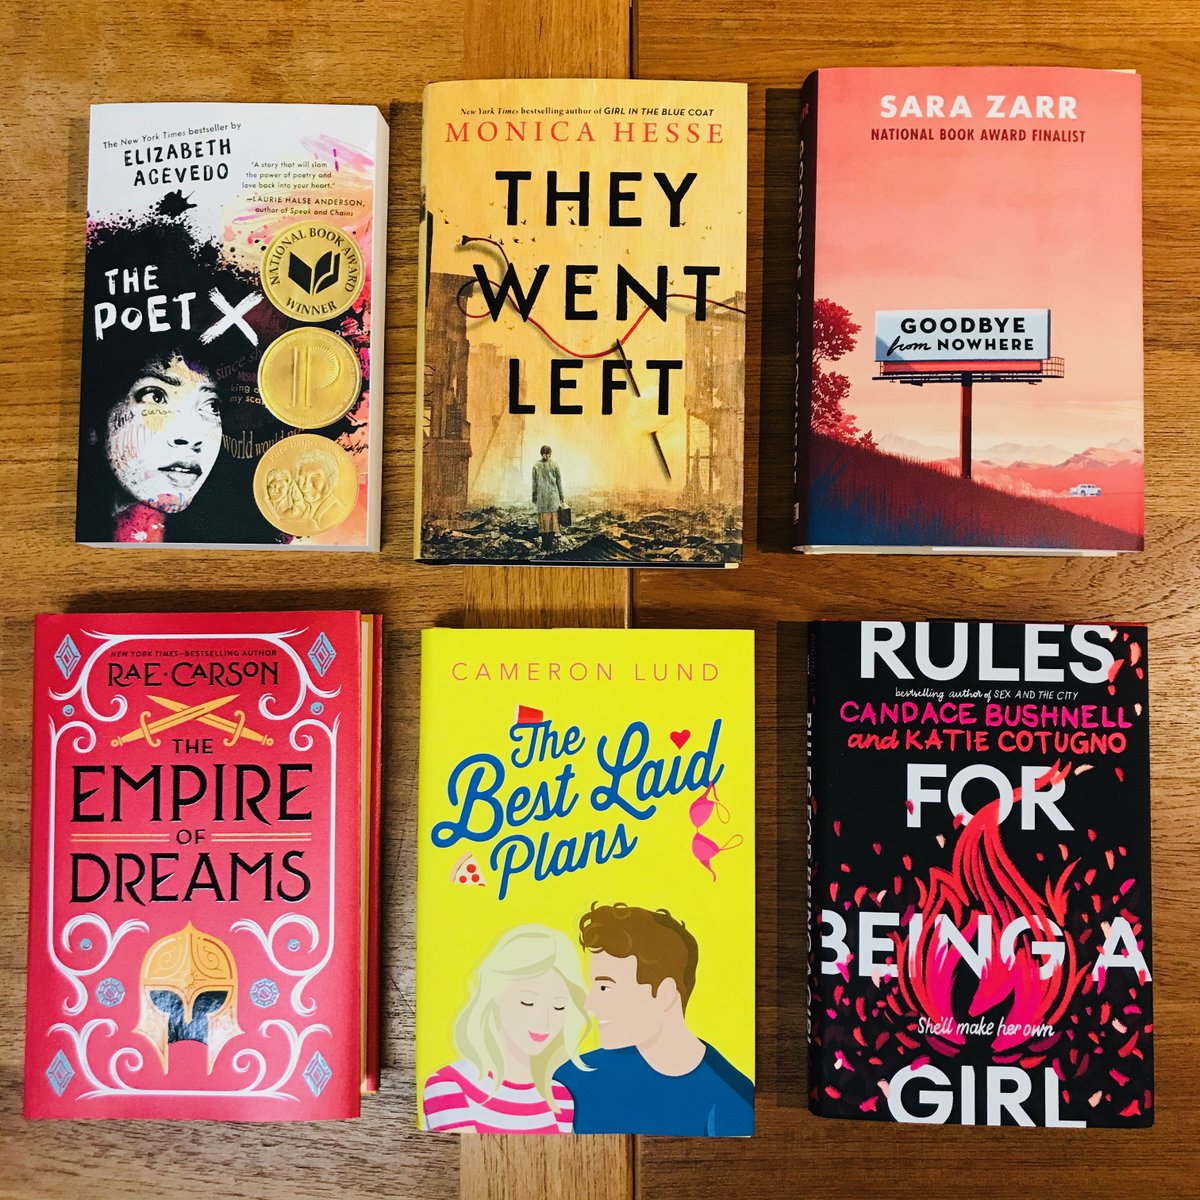 Paperback of THE POET X by  @AcevedoWrites!EMPIRE OF DREAMS by  @raecarson!THEY WENT LEFT by  @MonicaHesse!THE BEST LAID PLANS by  @camloond!GOODBYE FROM NOWHERE by  @sarazarrbooks!RULES FOR BEING A GIRL by  @CandaceBushnell &  @katiecotugno!